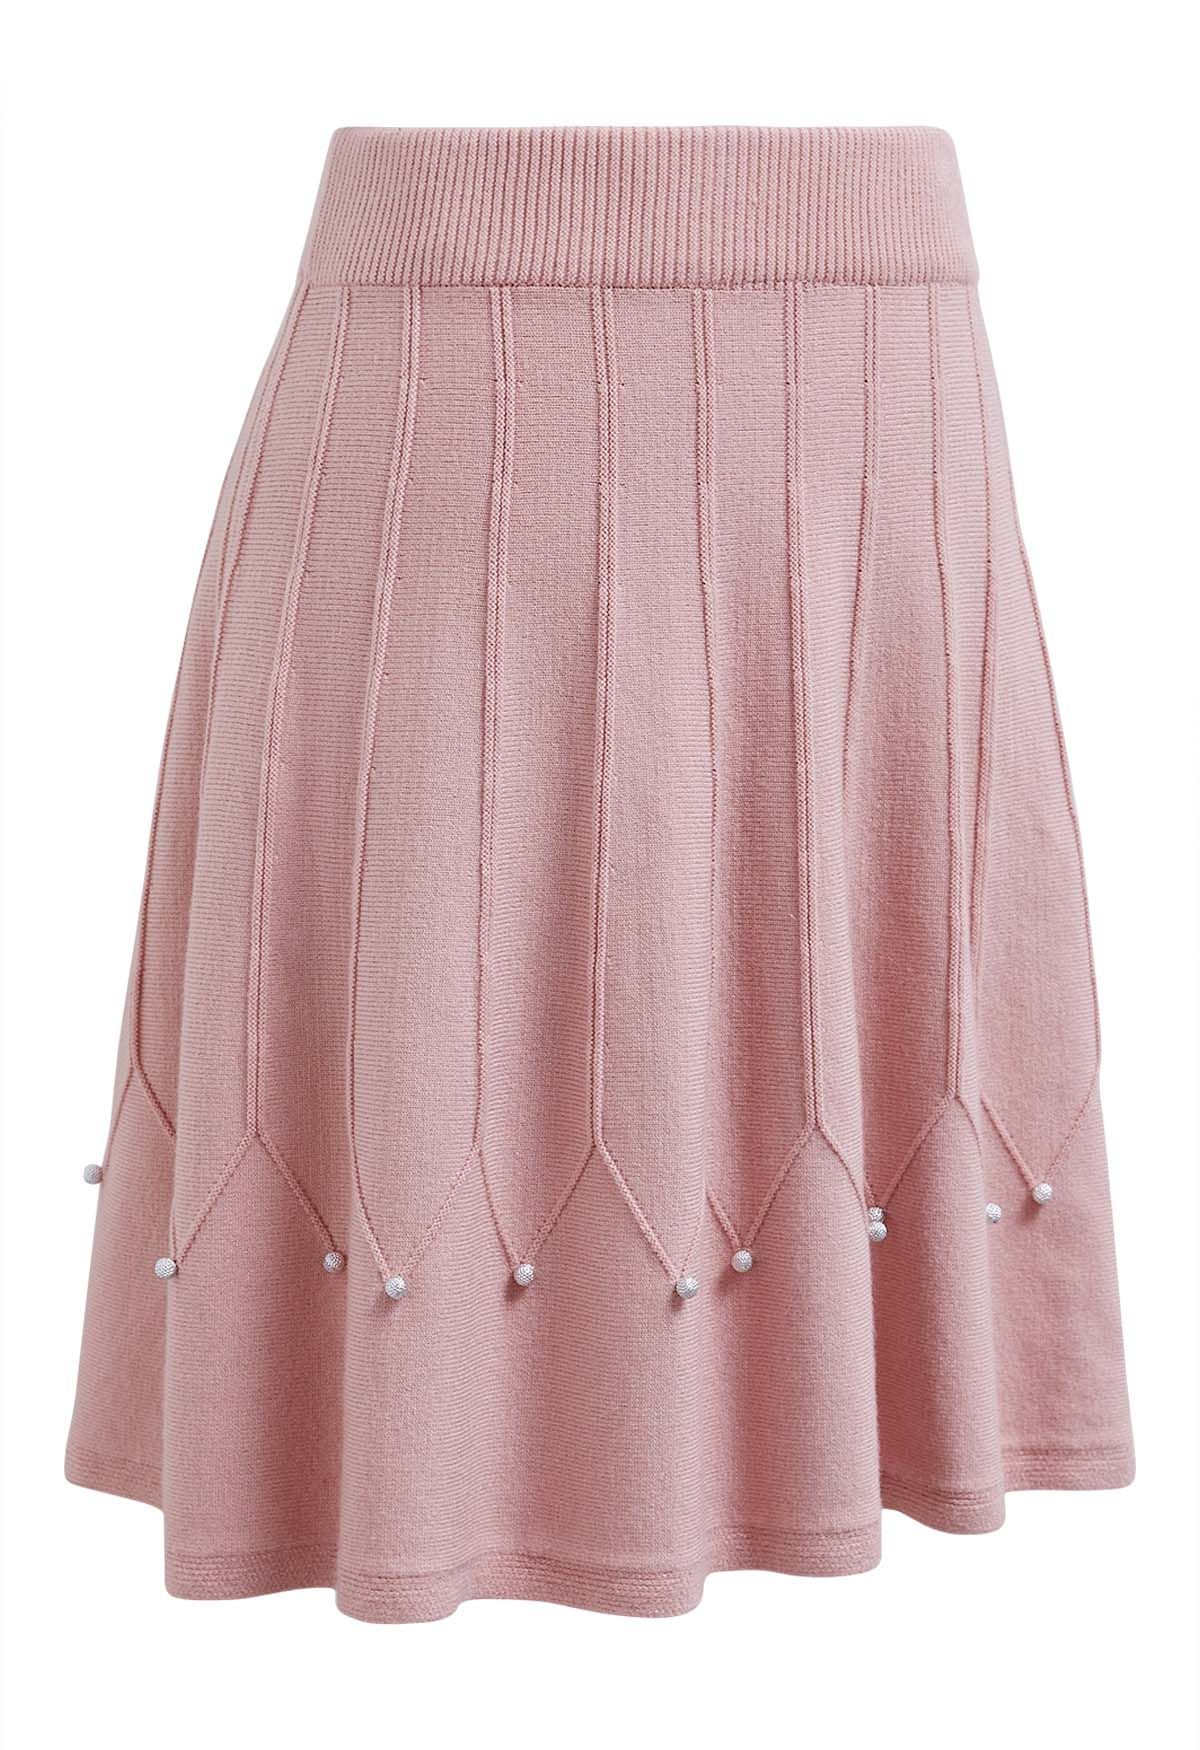 Silver Bead Embellished Seam Knit Skirt in Pink - Retro, Indie and ...